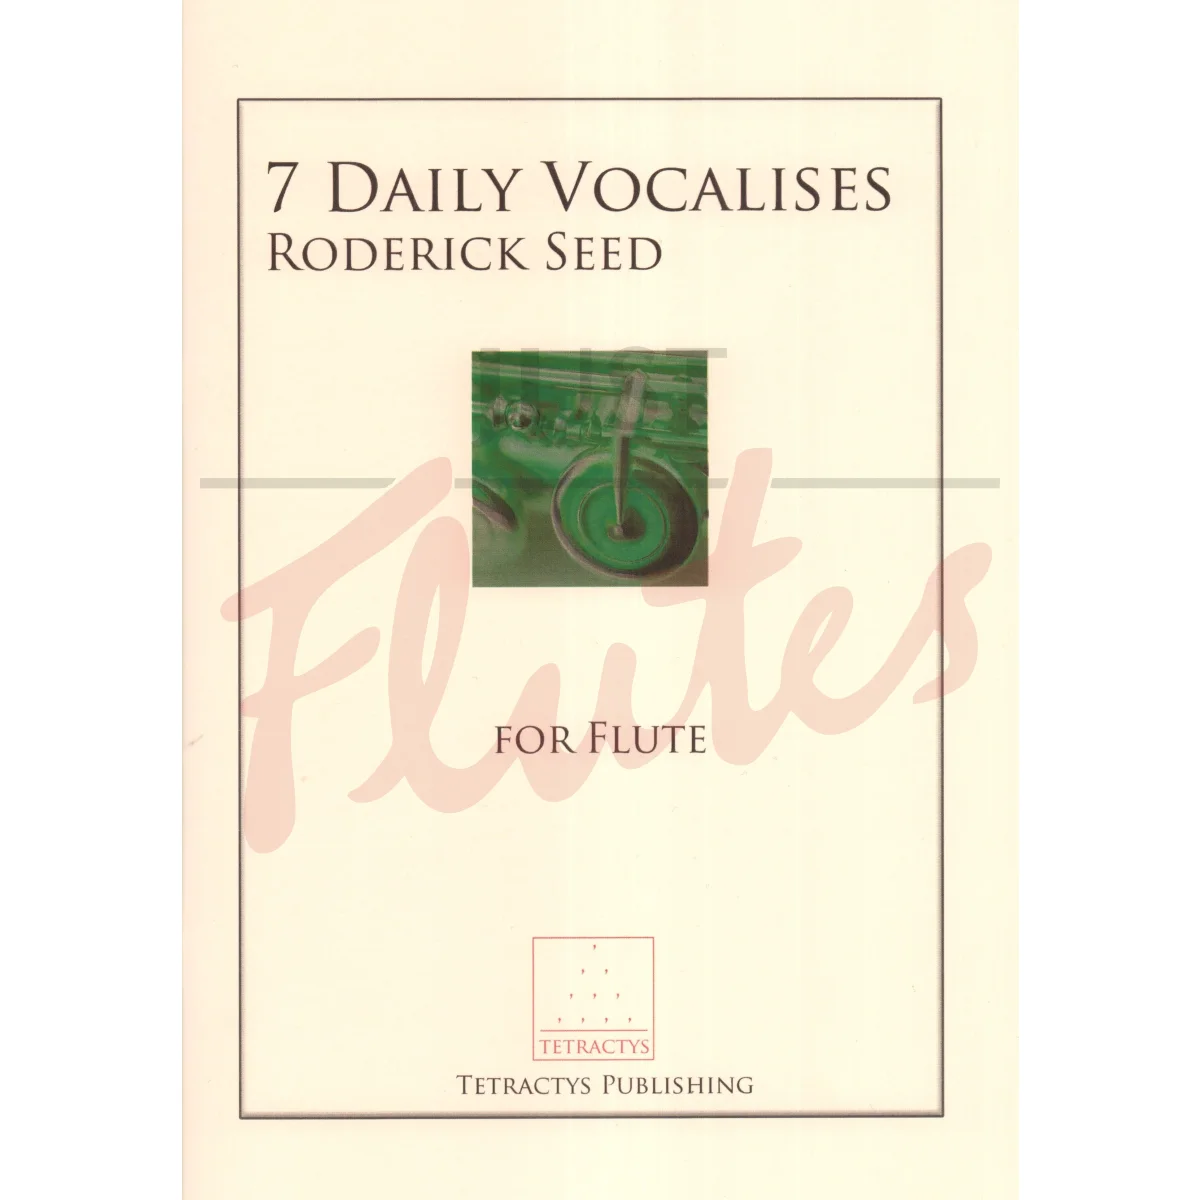 7 Daily Vocalises for Flute